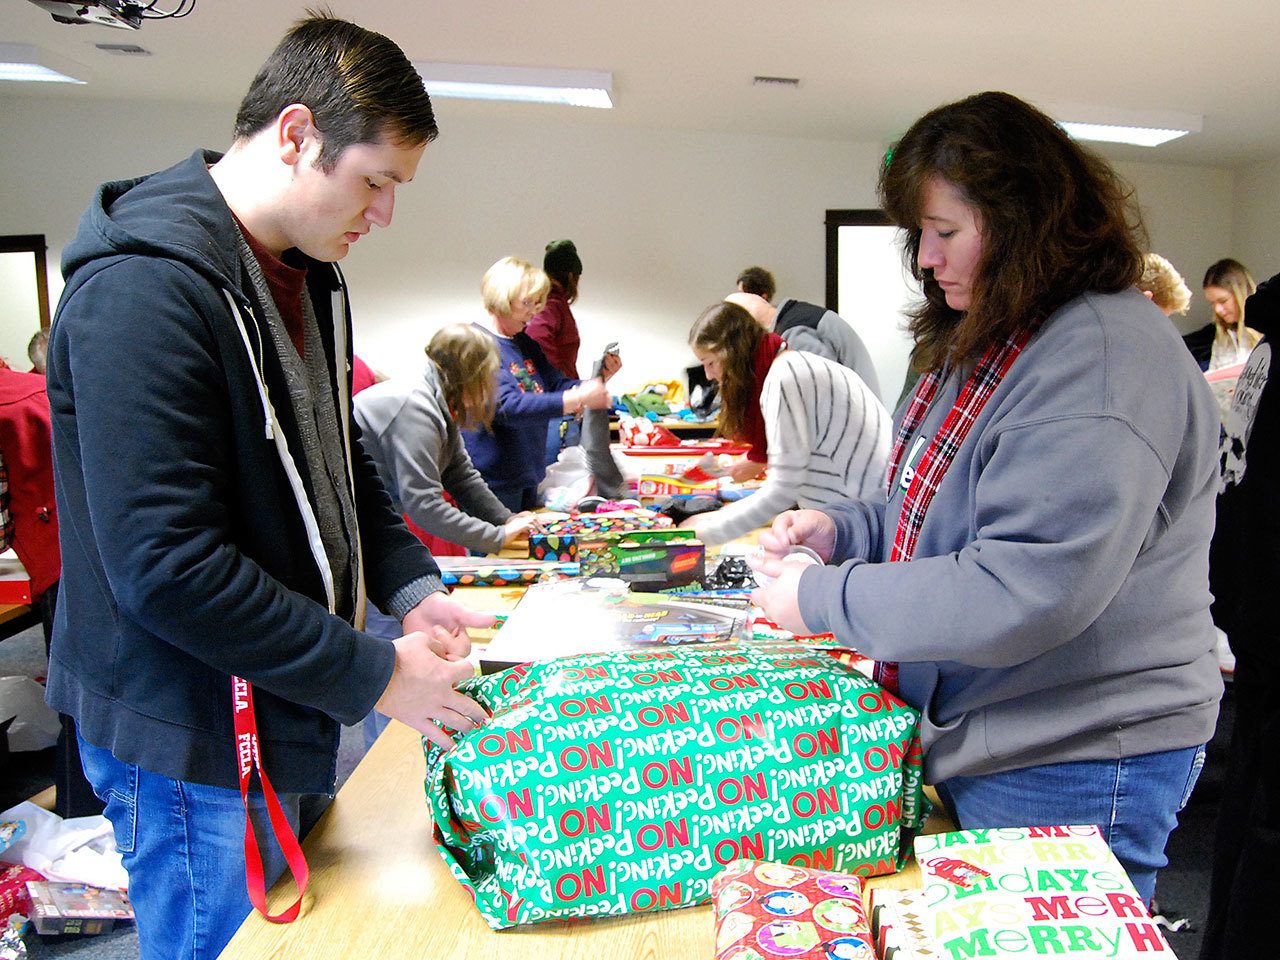 Austin Gese (left) and Laura Gese wrap presents inside the South Kitsap Fire and Rescue’s Tremont station Saturday, Dec. 17. Family member John Gese serves as co-chair for the event. Bob Smith | Kitsap Daily News photo